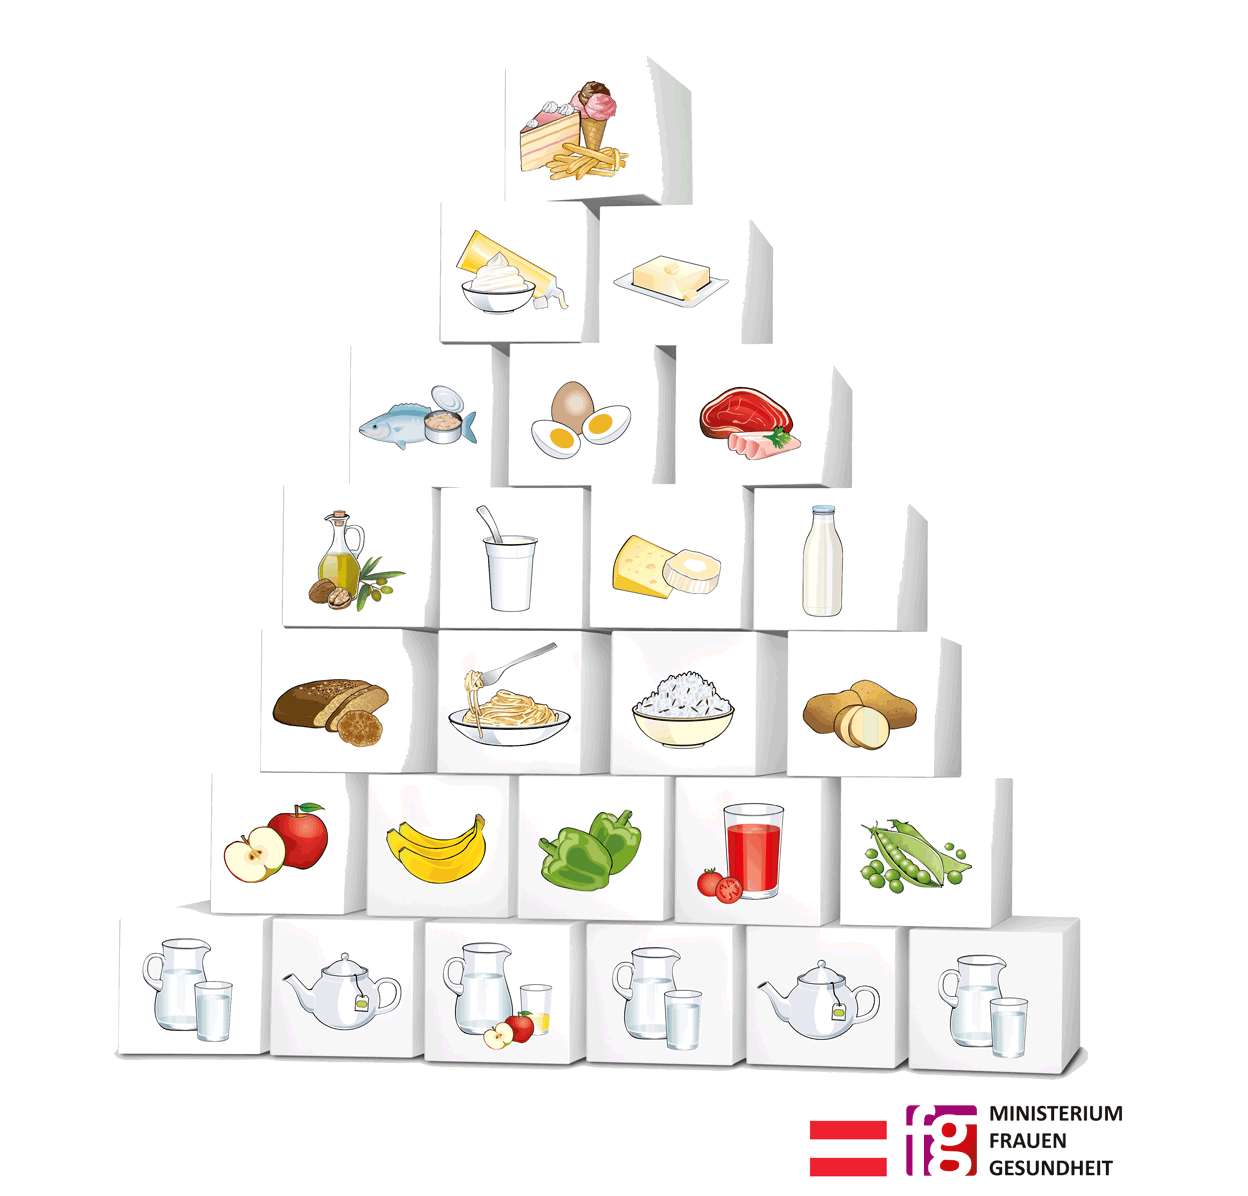 Food pyramid Austria - The food pyramid provides information on the type and quantity of food and drink that should be consumed. It is based on a block principle. The seven levels of the pyramid show how often different food groups should be eaten.